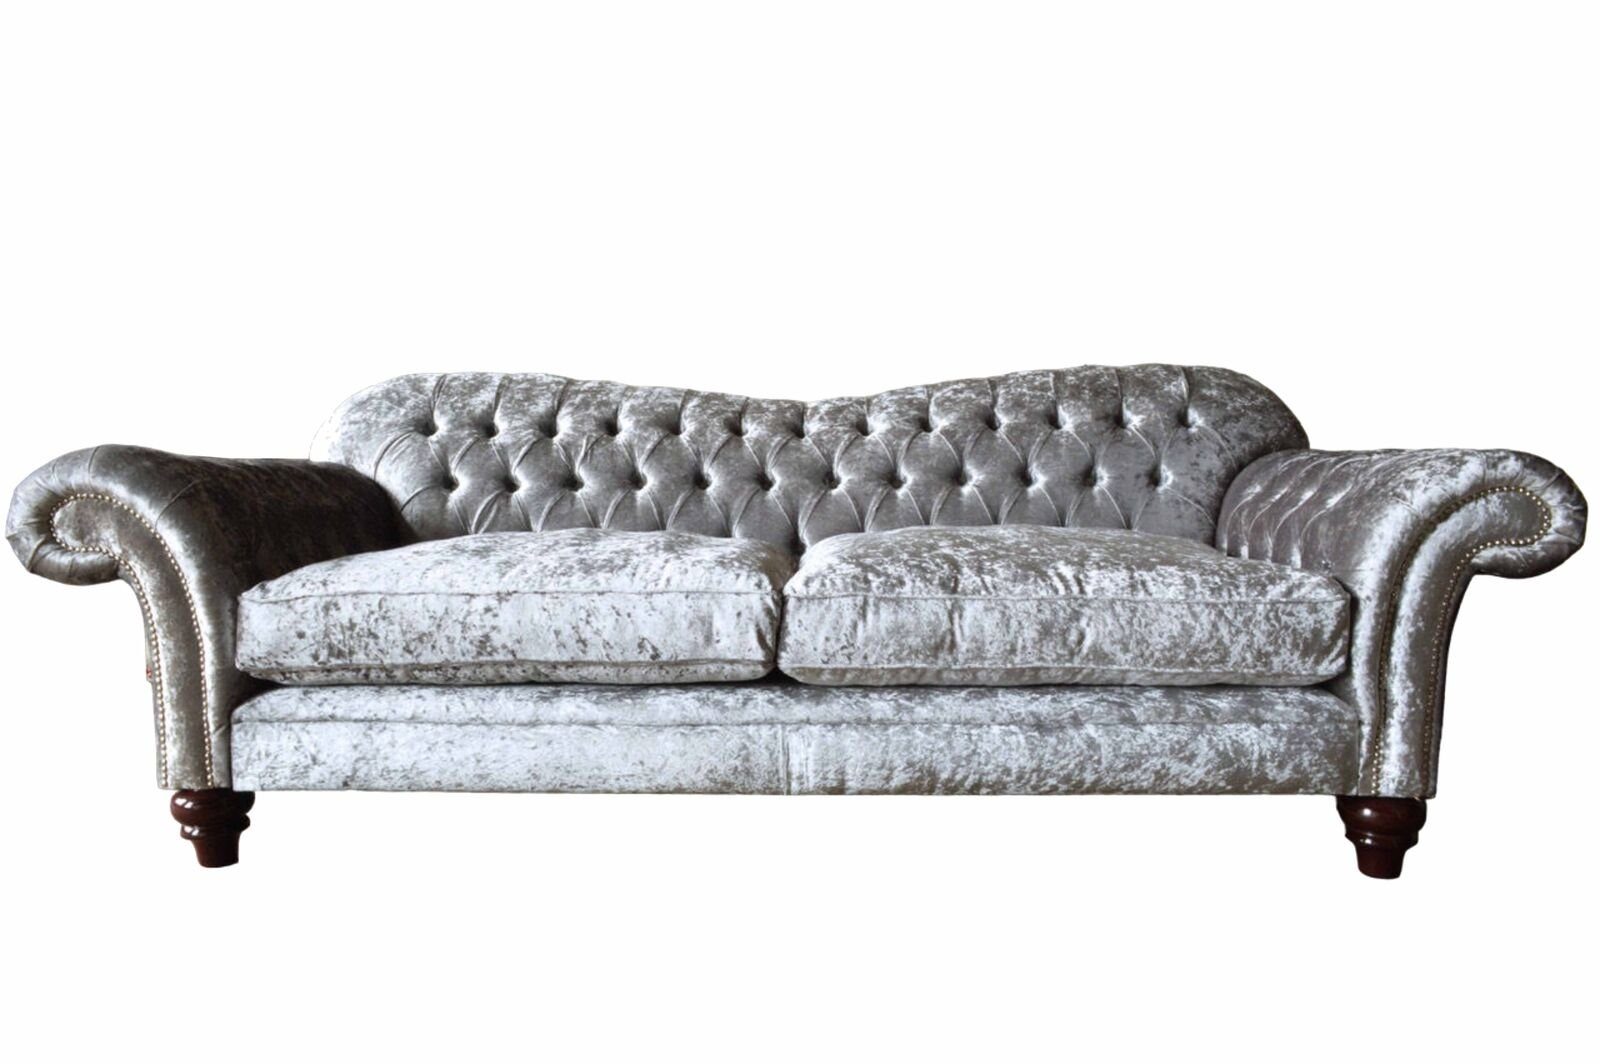 JVmoebel Sofa Chesterfield Samt in Couch Design Made Europe Textil, Sitzer 3 Grau Sofa